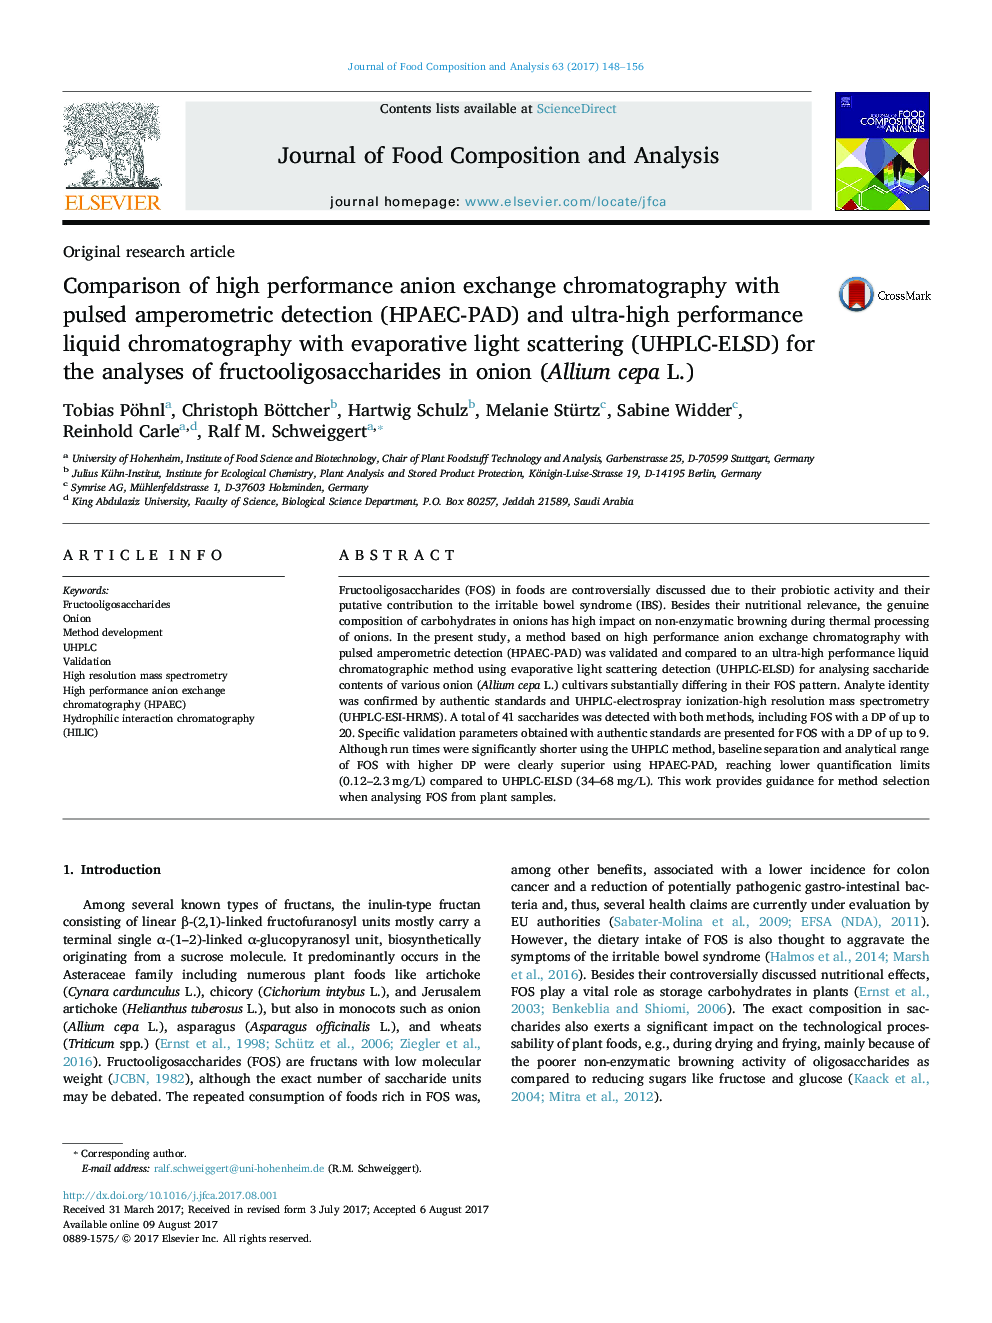 Original research articleComparison of high performance anion exchange chromatography with pulsed amperometric detection (HPAEC-PAD) and ultra-high performance liquid chromatography with evaporative light scattering (UHPLC-ELSD) for the analyses of fructo